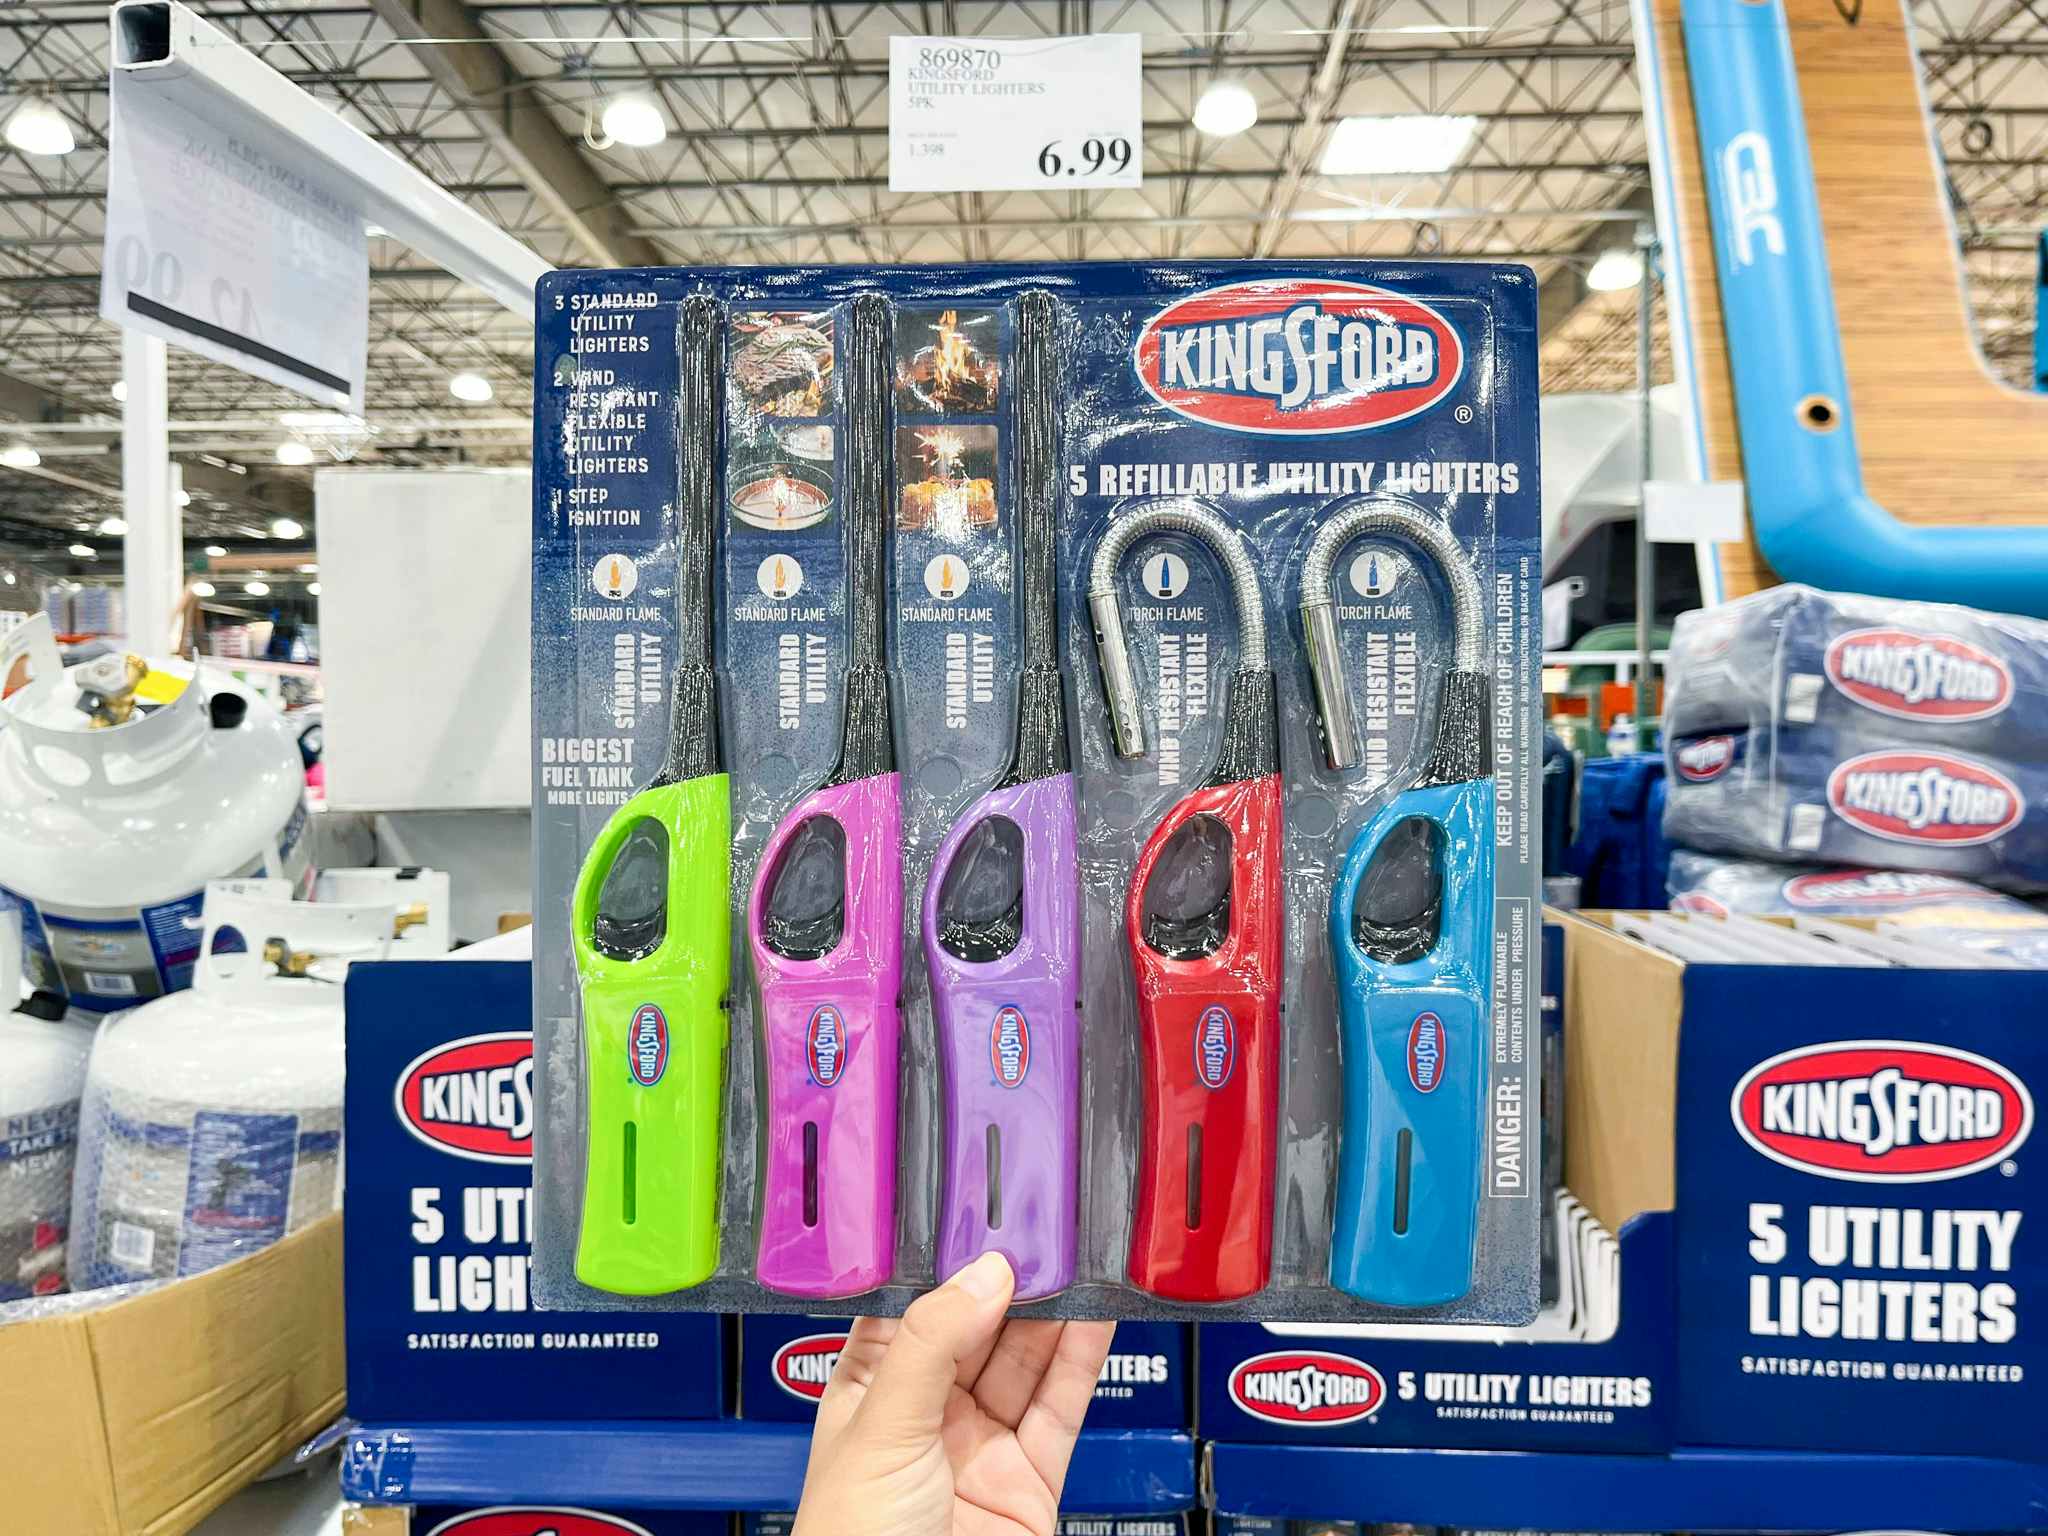 costco kingsford utility lighters 5 pack